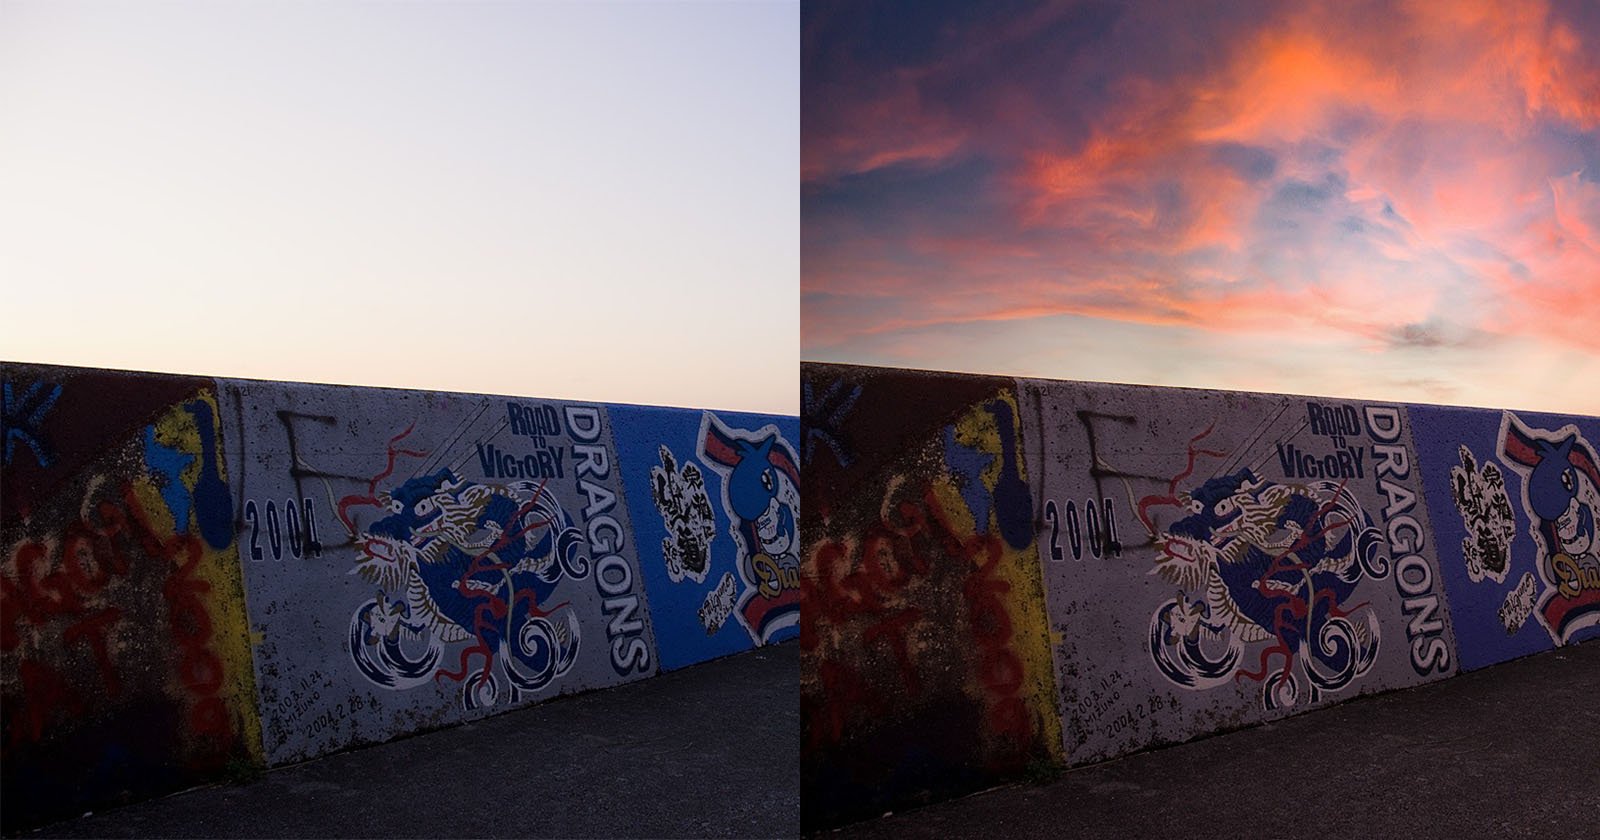 Photoshop’s Sky Replacement Makes Photography Something It’s Not